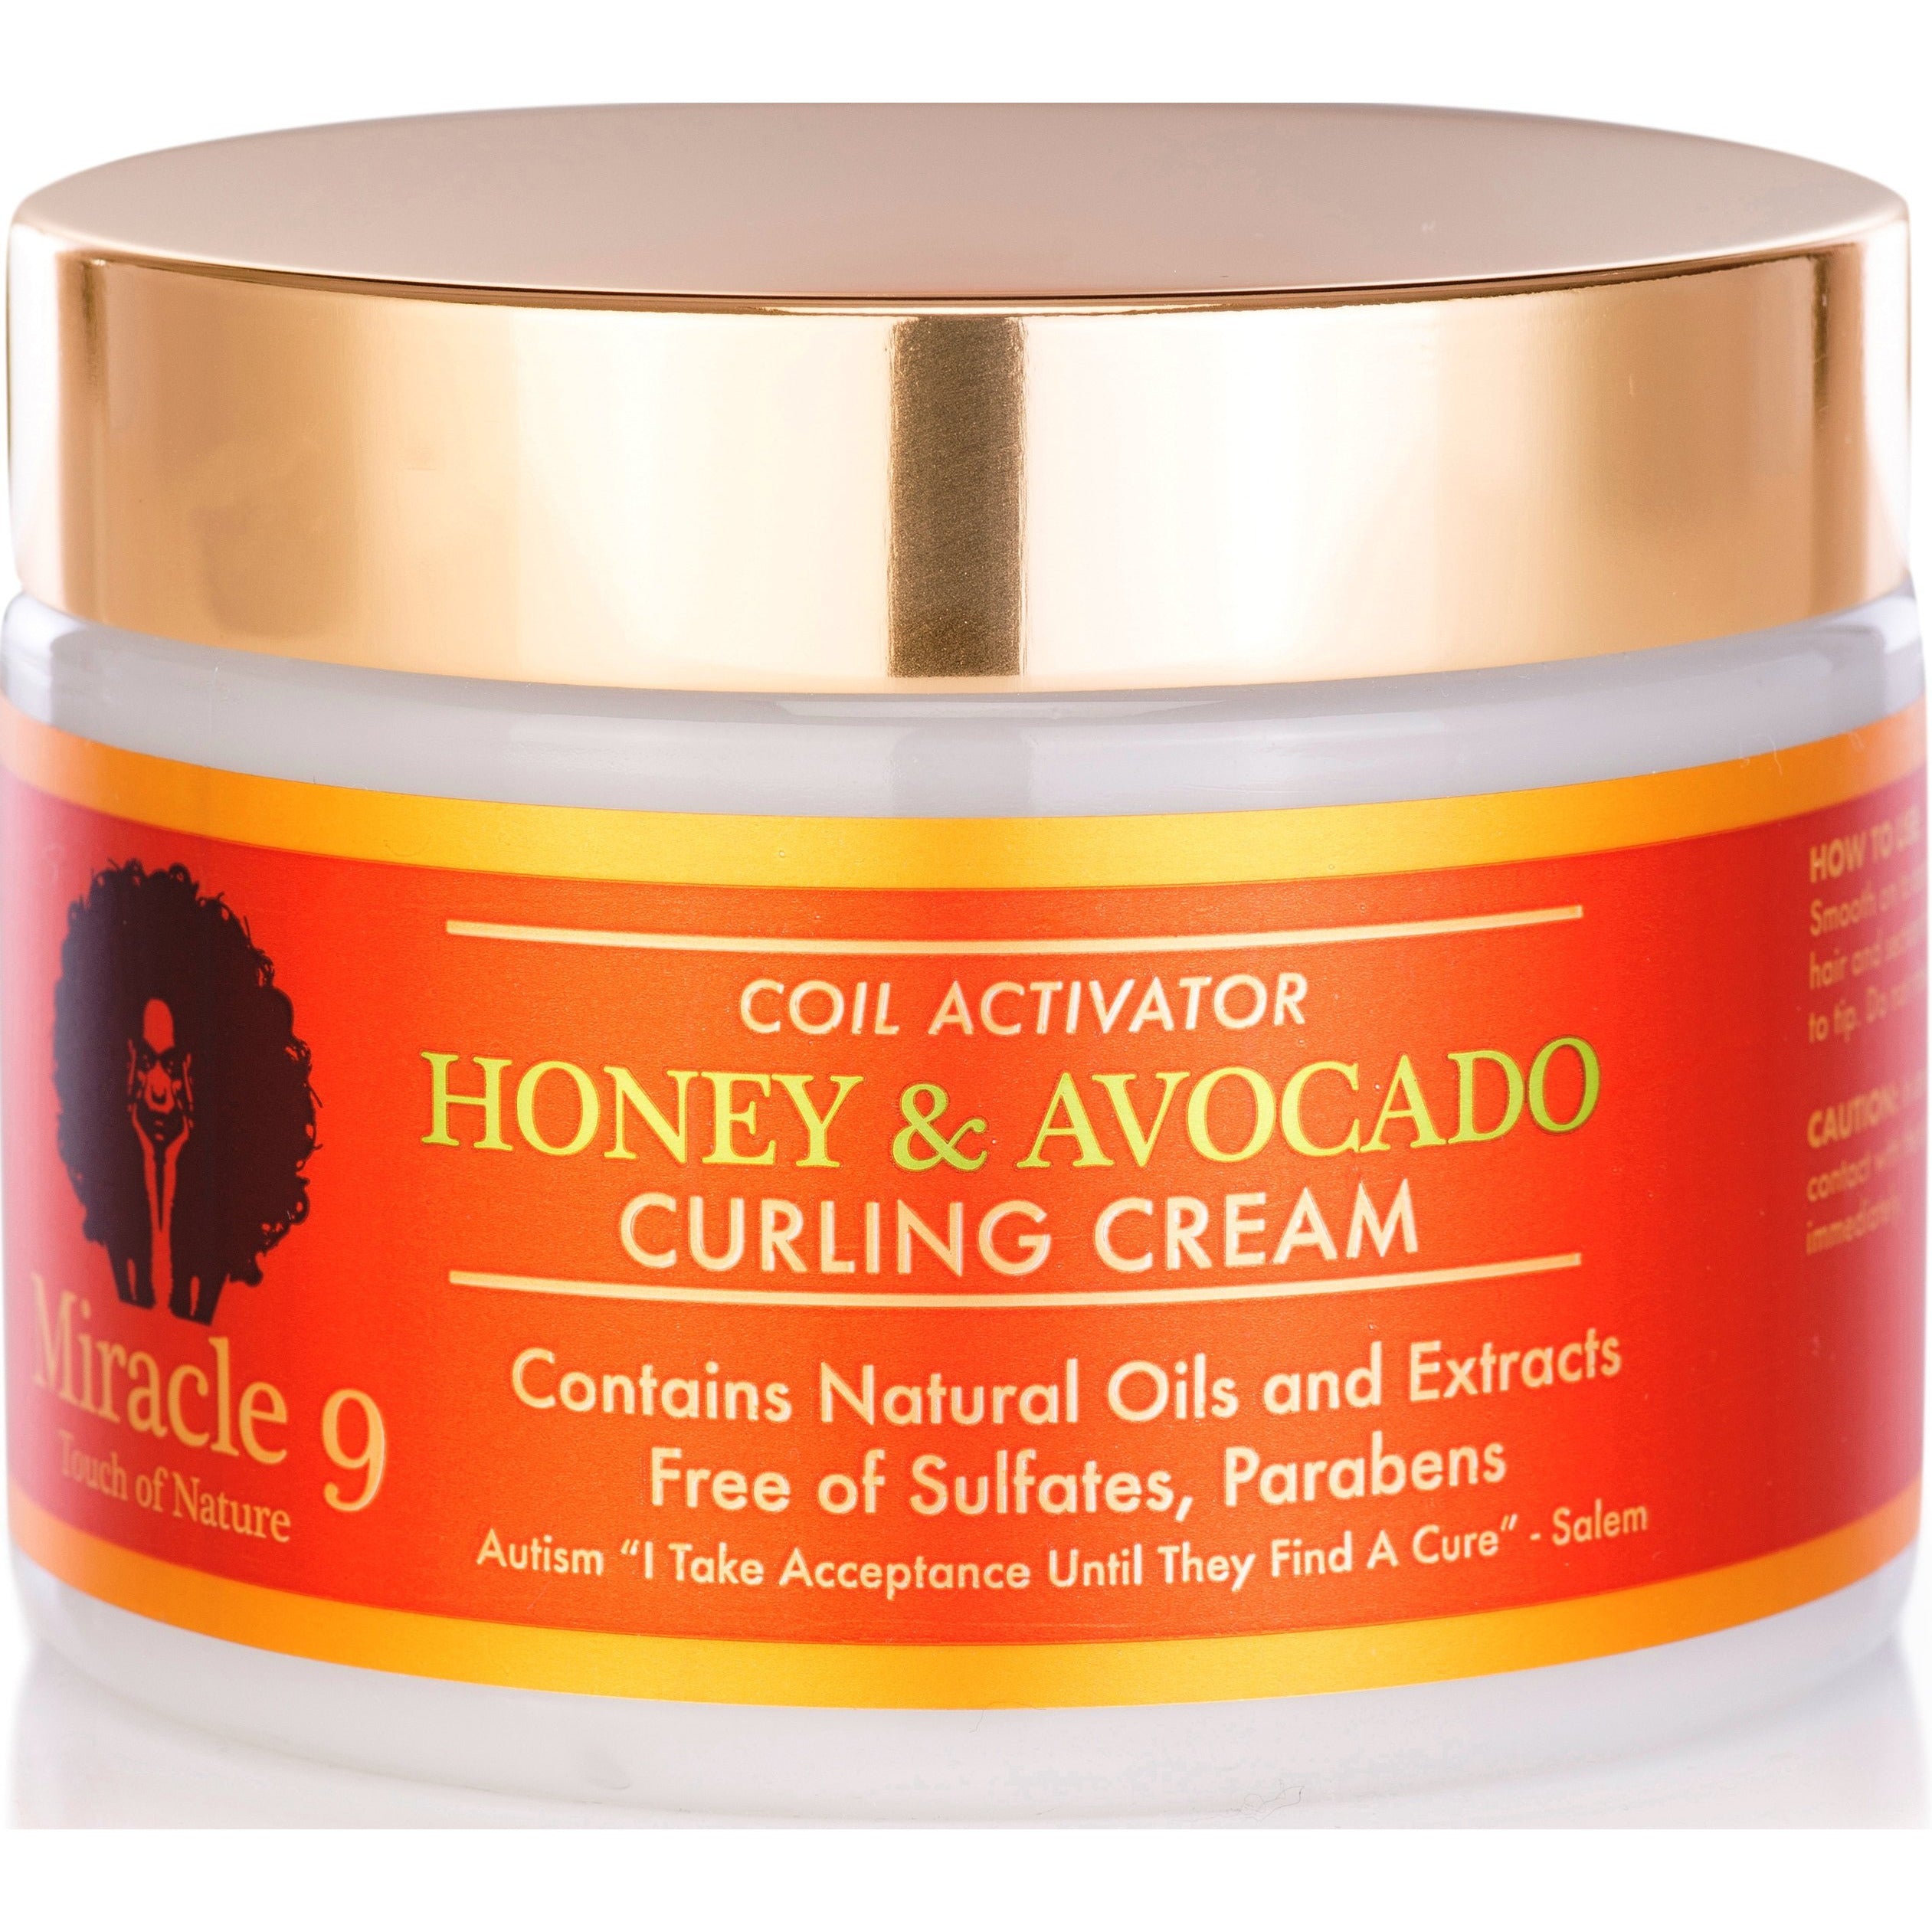 4th Ave Market: Miracle9 Coil Activator Honey & Avocado Curling Cream